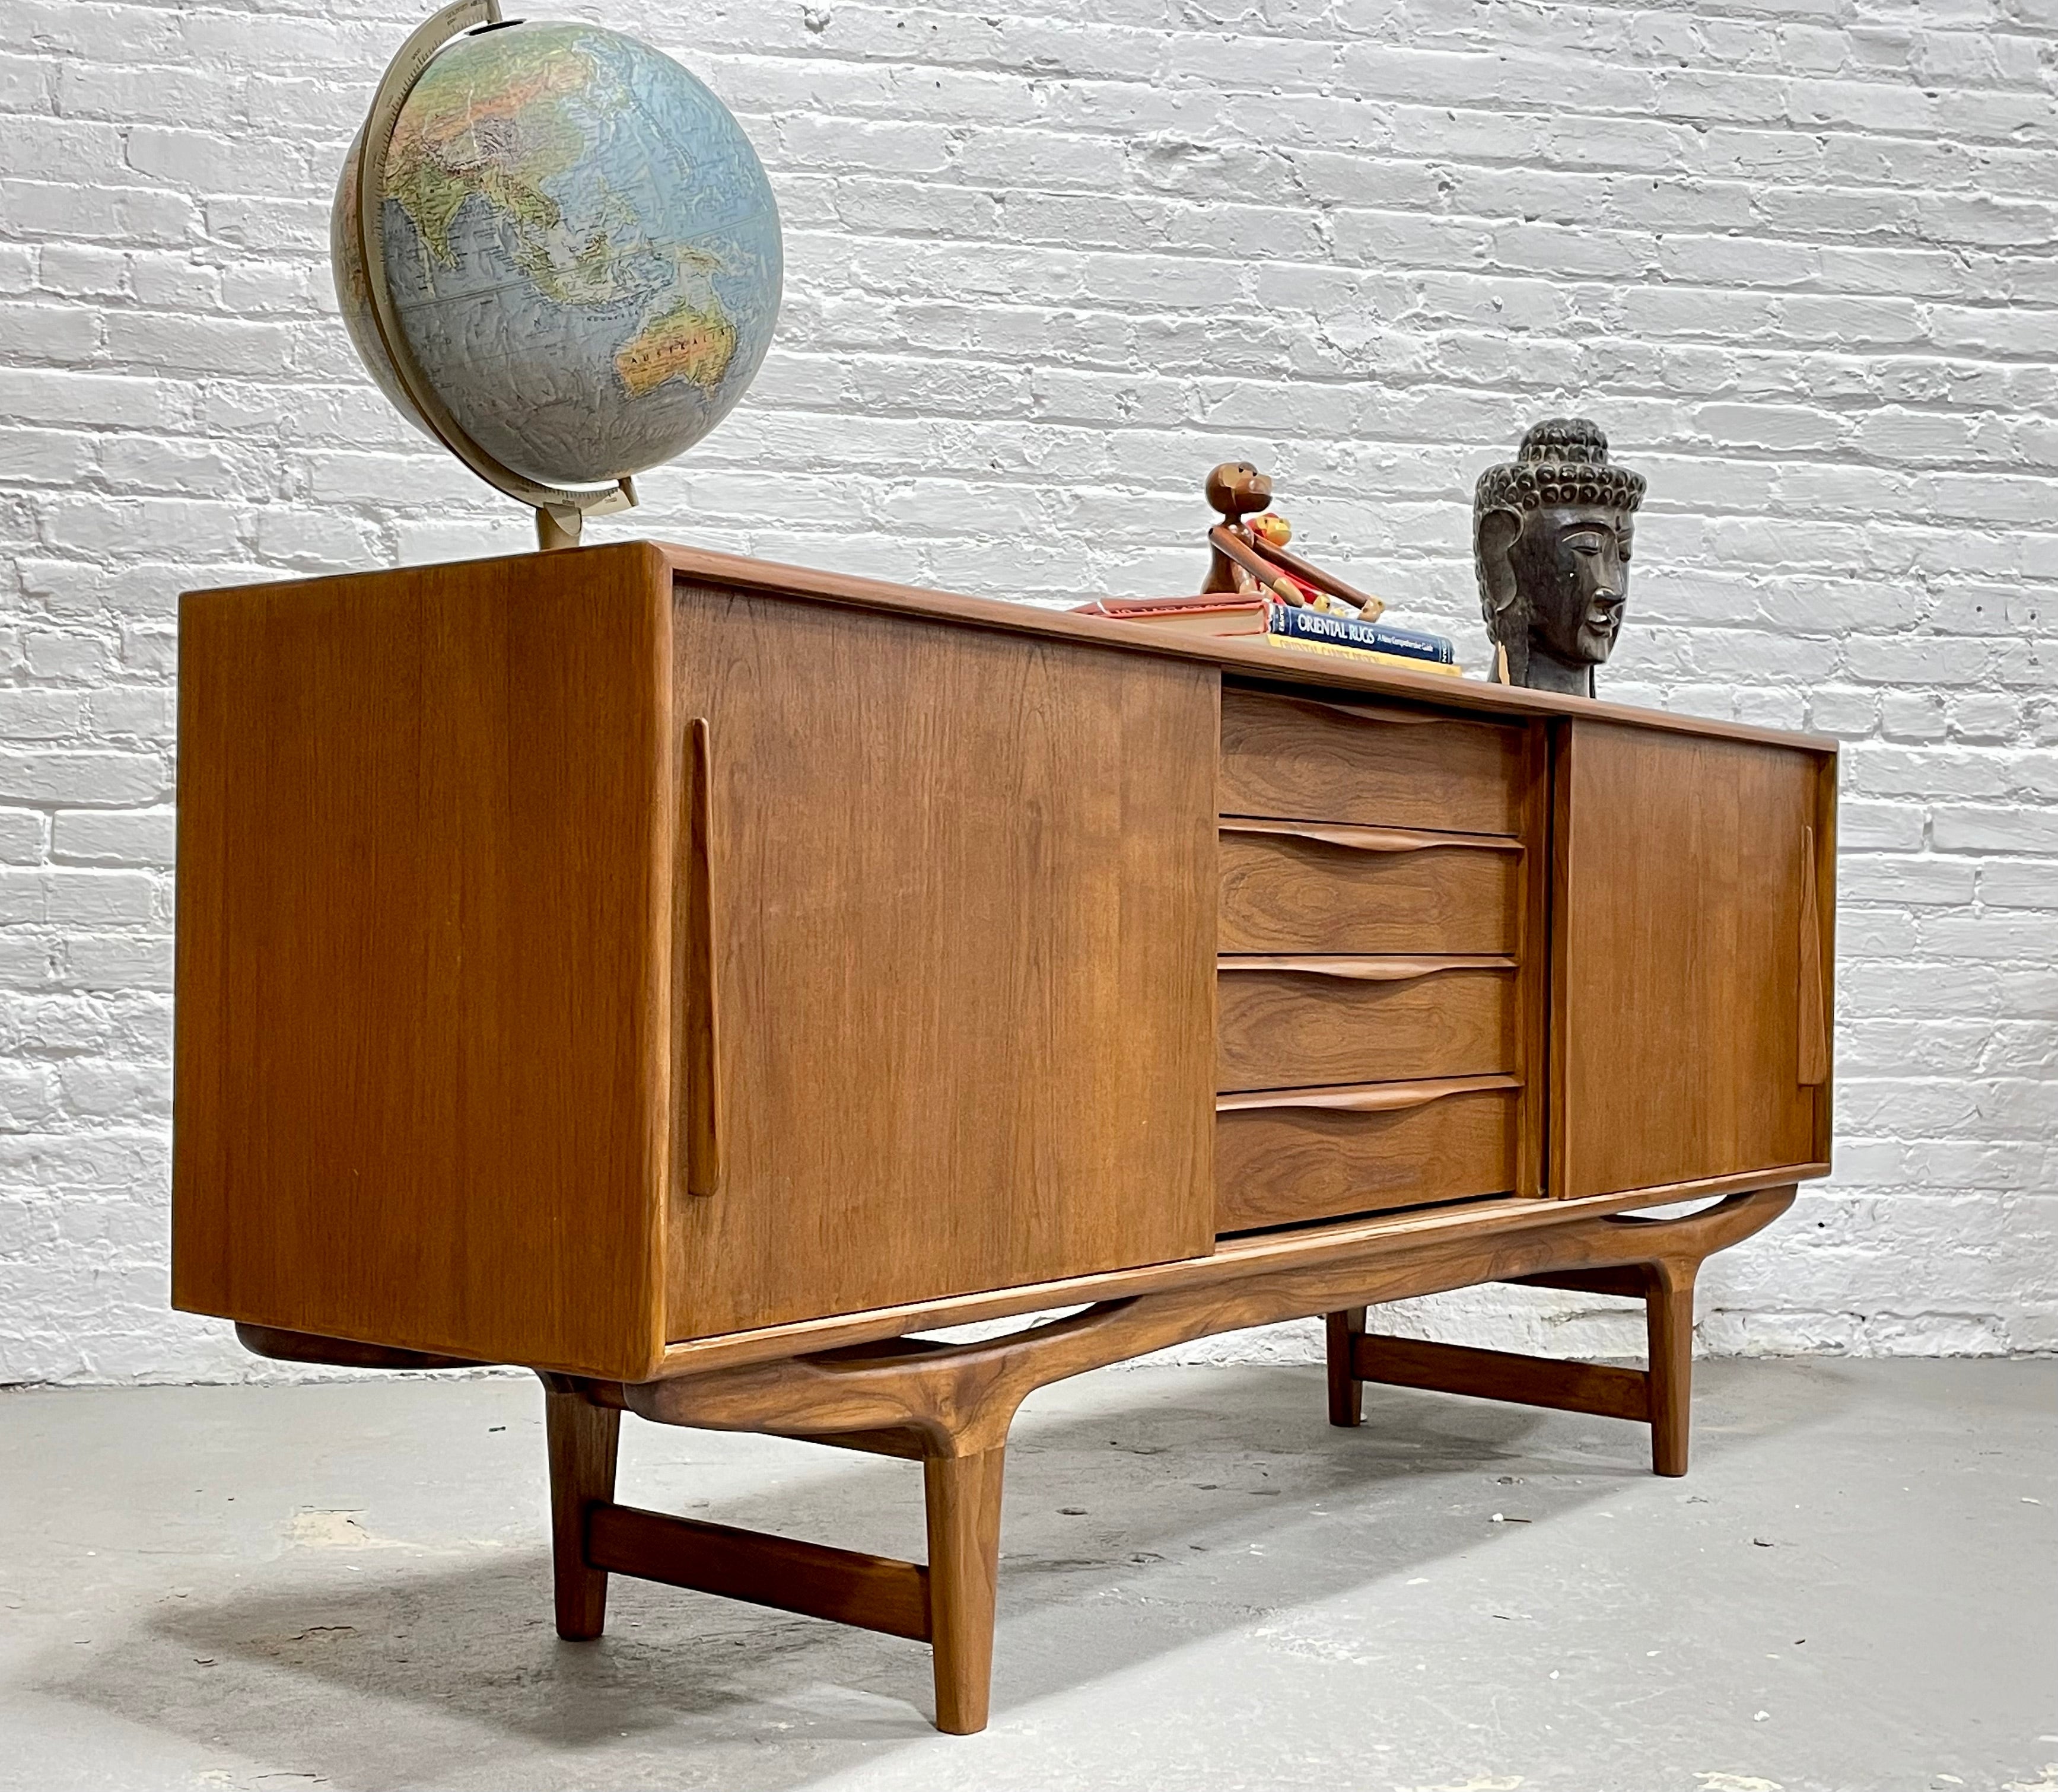 LONG & SCULPTED Mid Century Modern styled Danish CREDENZA / media stand / Sideboard